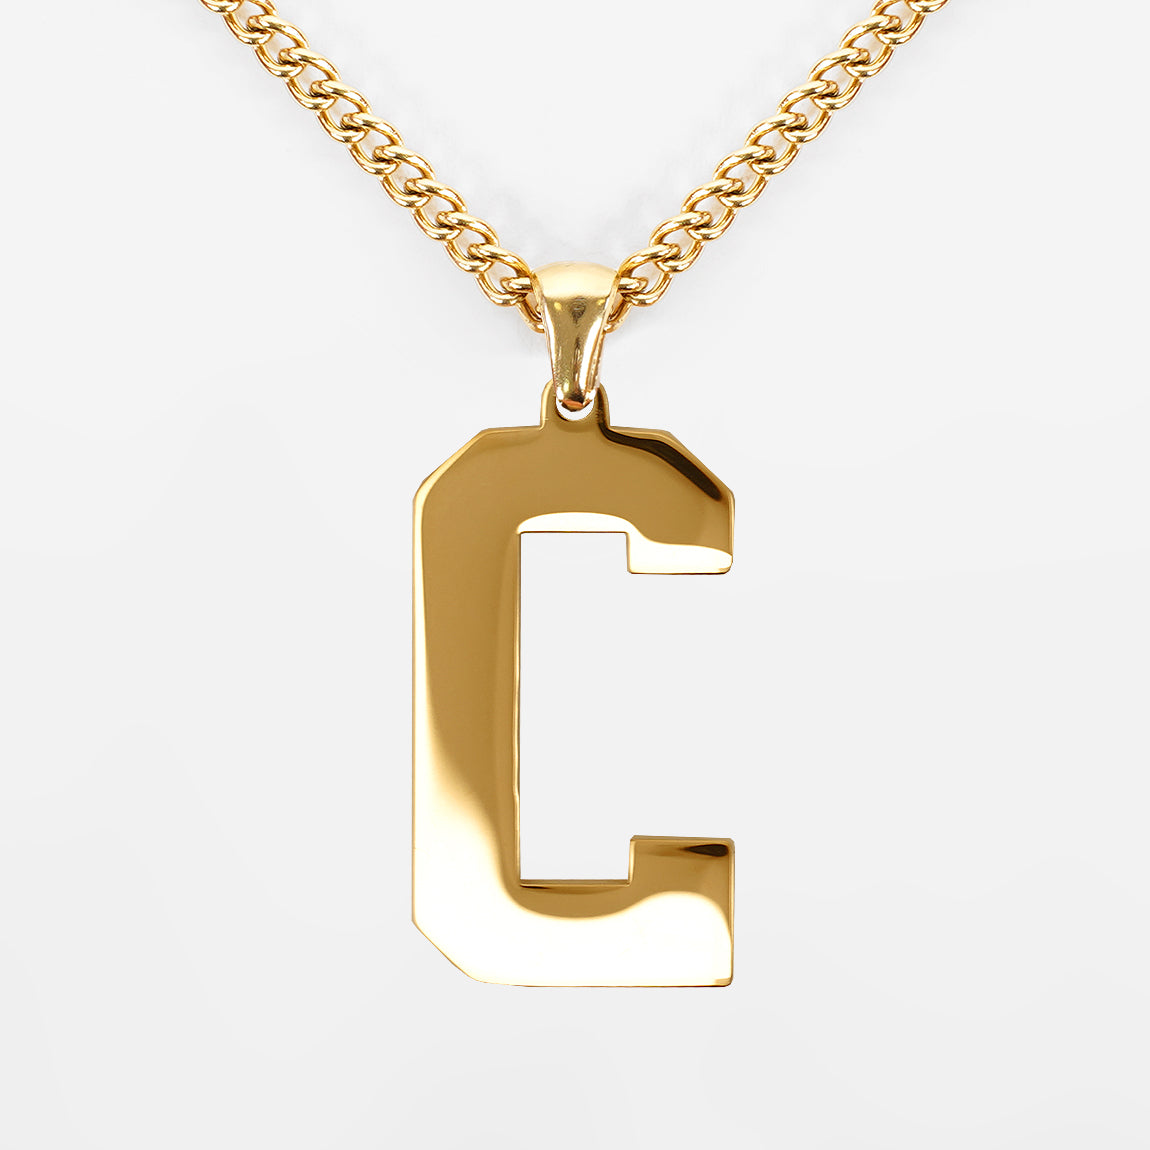 C Letter Pendant with Chain Necklace - Gold Plated Stainless Steel